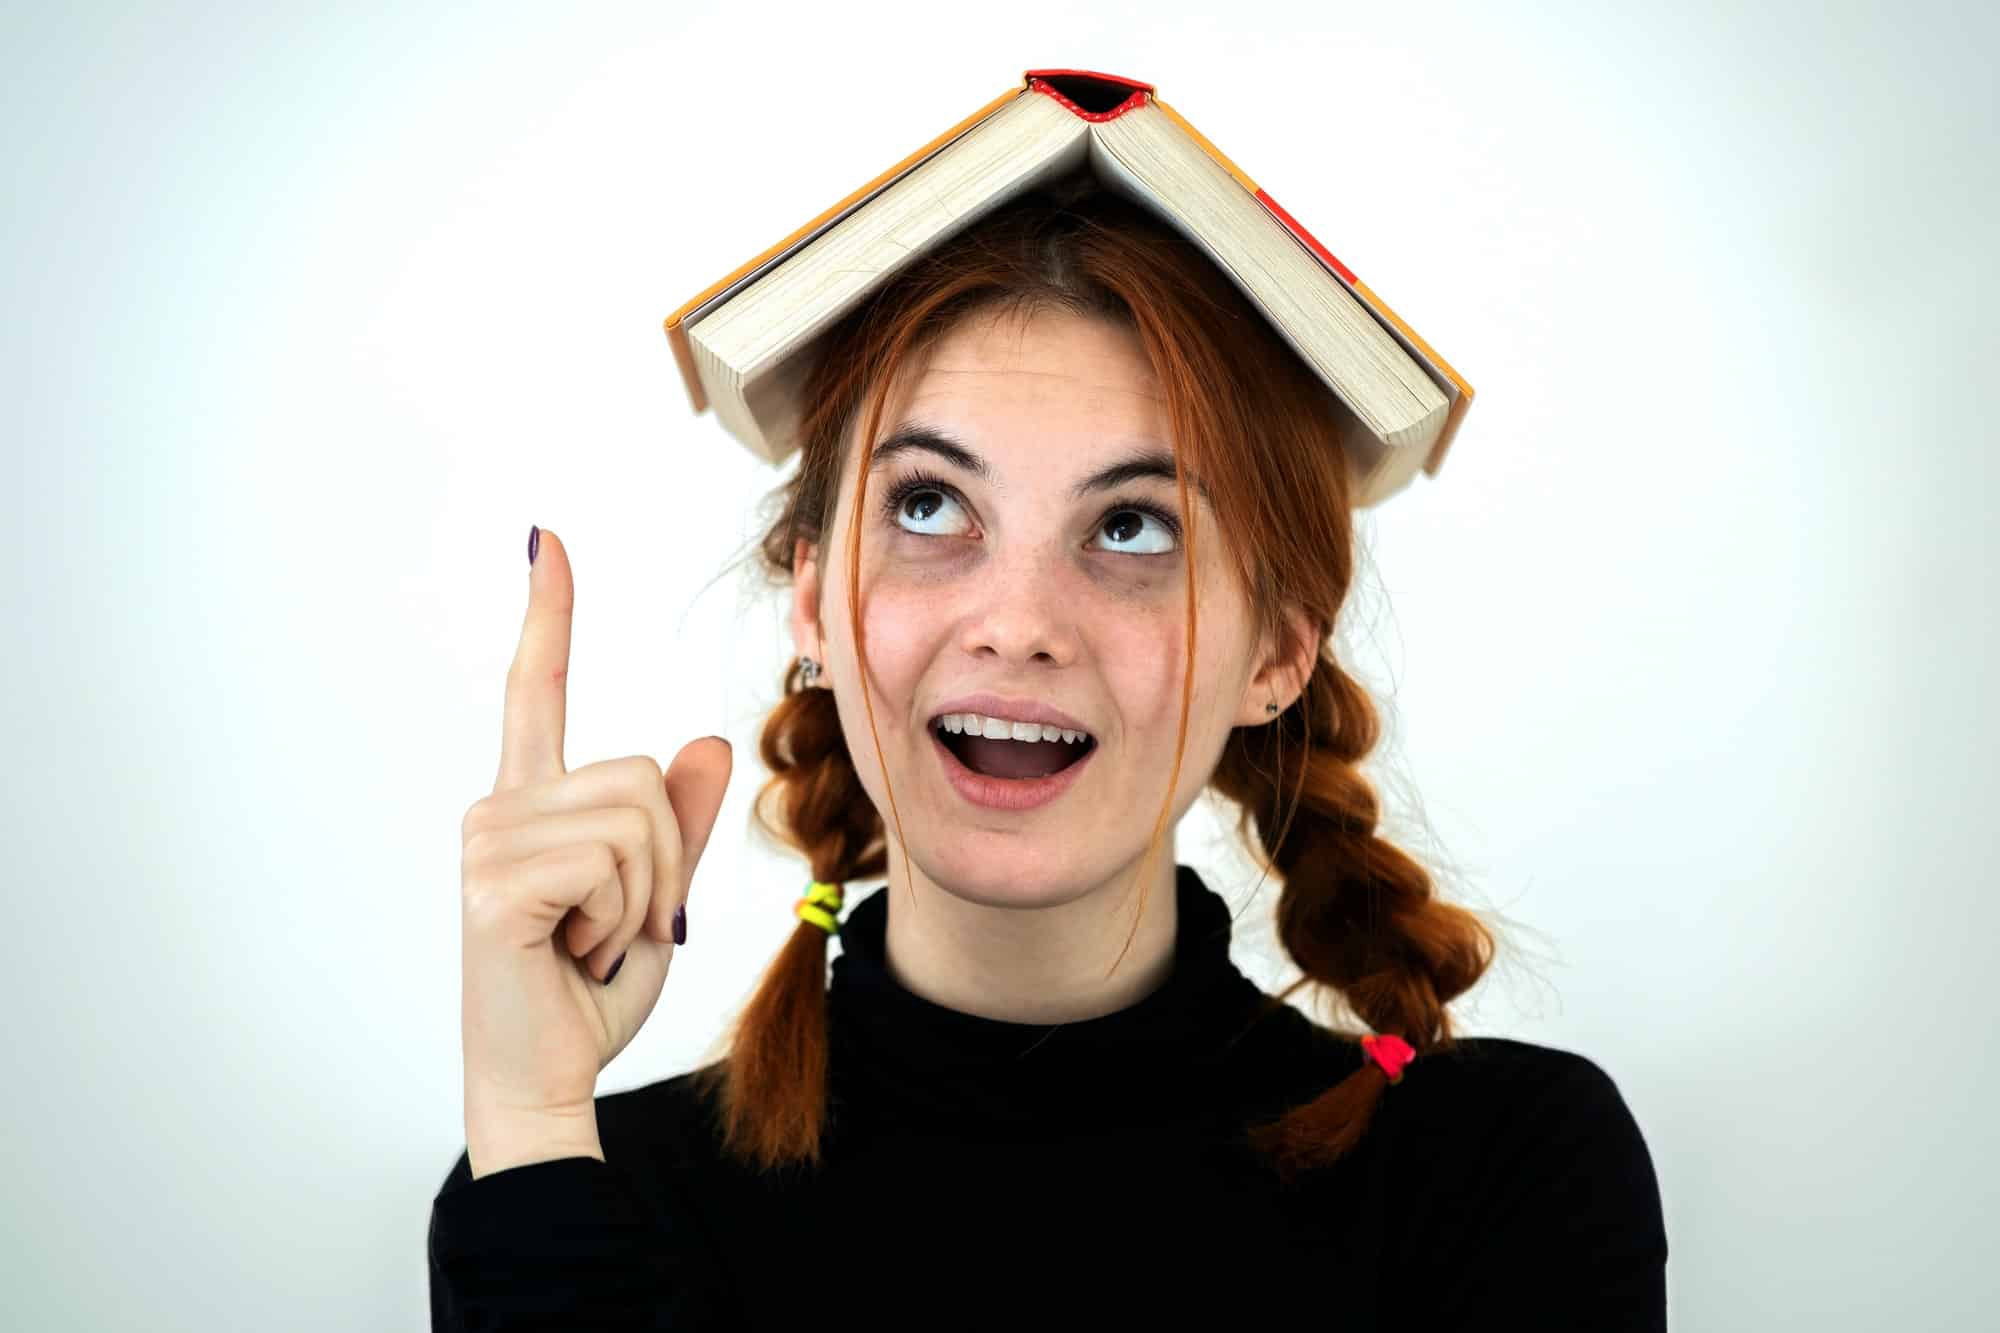 Portrait of funny young smiling student girl with an open book on her head holding her point finger